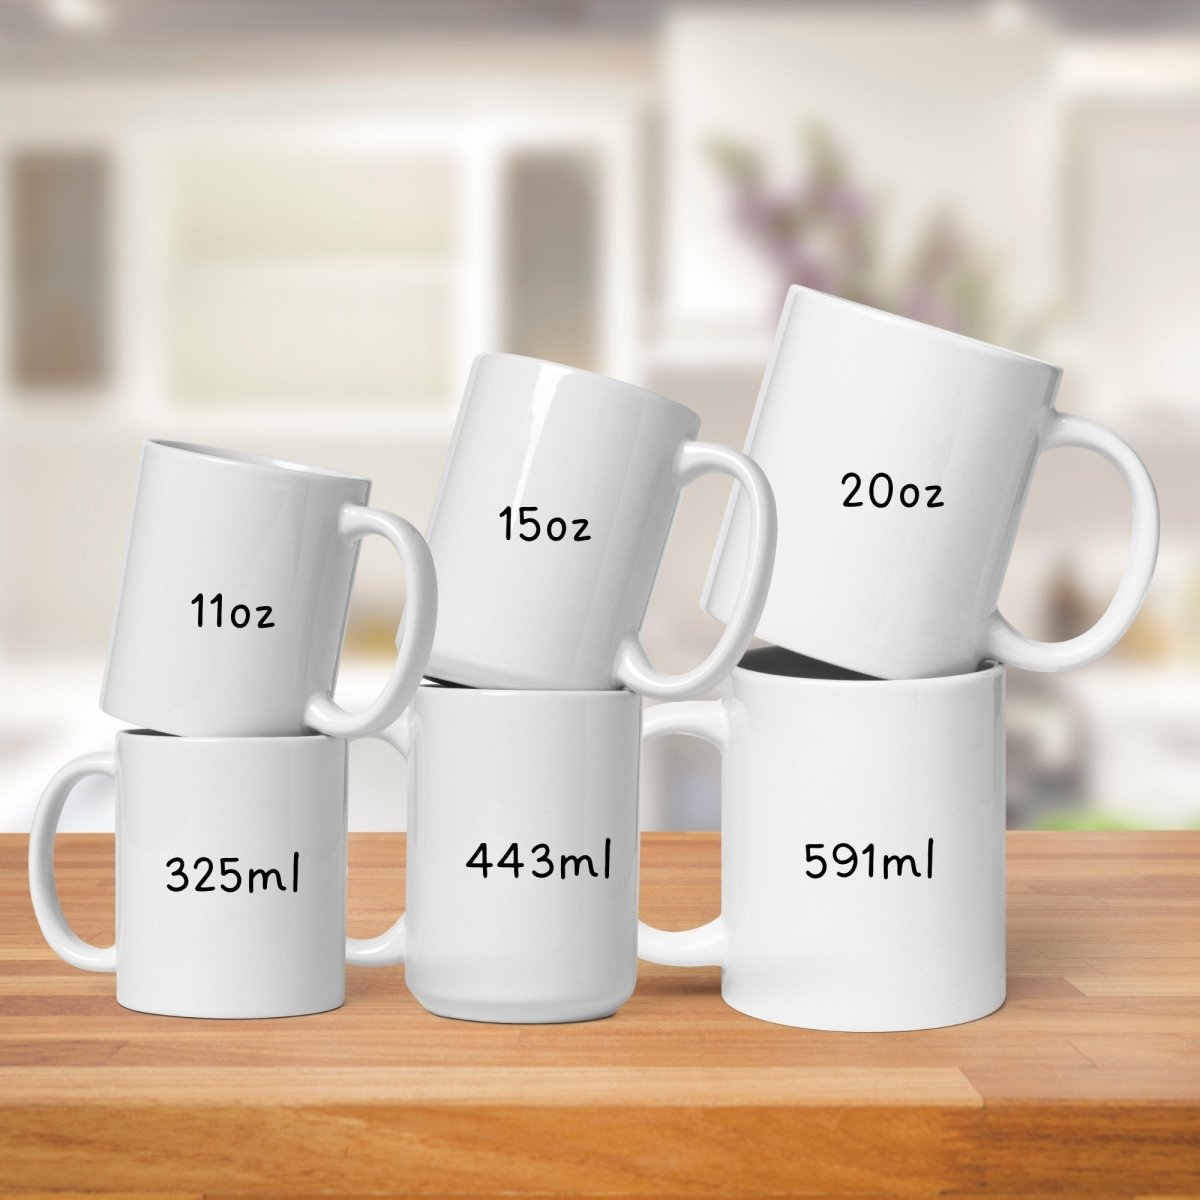 Personalized Lovers Mug Custom Valentines Day Snowman Couple Mug Gift for Couple Gift Idea for Him and Her Cute Custom Name Anniversary Gift - Everything Pixel